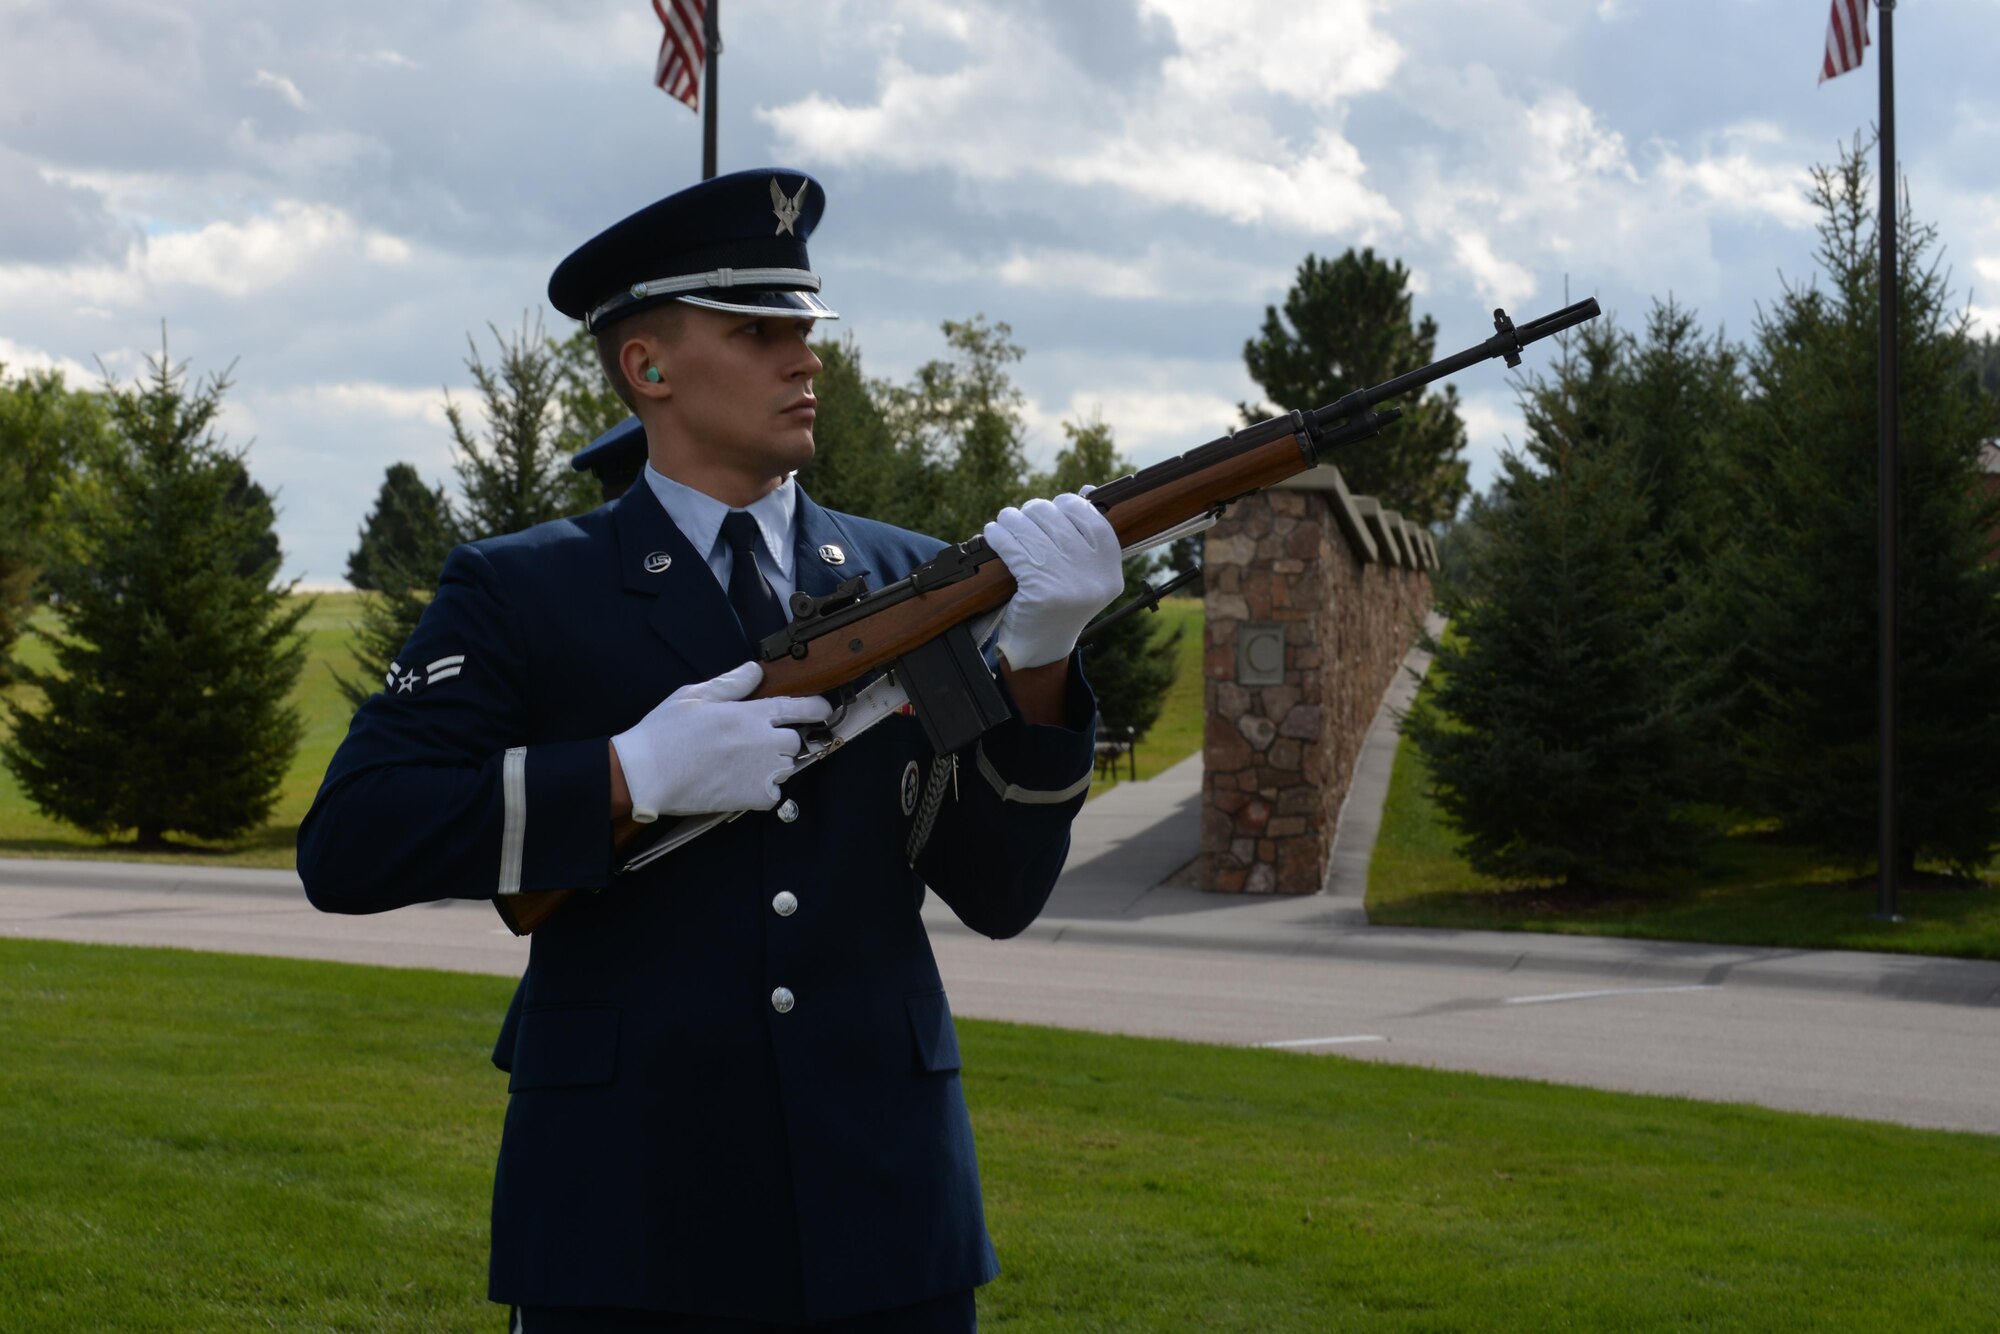 Airman 1st Class Dyllon Schwartz, a crew chief assigned to the 28th Aircraft Maintenance Squadron 37th Aircraft Maintenance Unit, fires a blank round during the nine-volley salute during a funeral at Black Hills National Cemetery in Sturgis, S.D., Sept. 26, 2017. Honor guard personnel undergo a two-week initial training course, followed by returning for training once to twice a week. (U.S. Air Force photo by Airman Nicolas Z. Erwin)